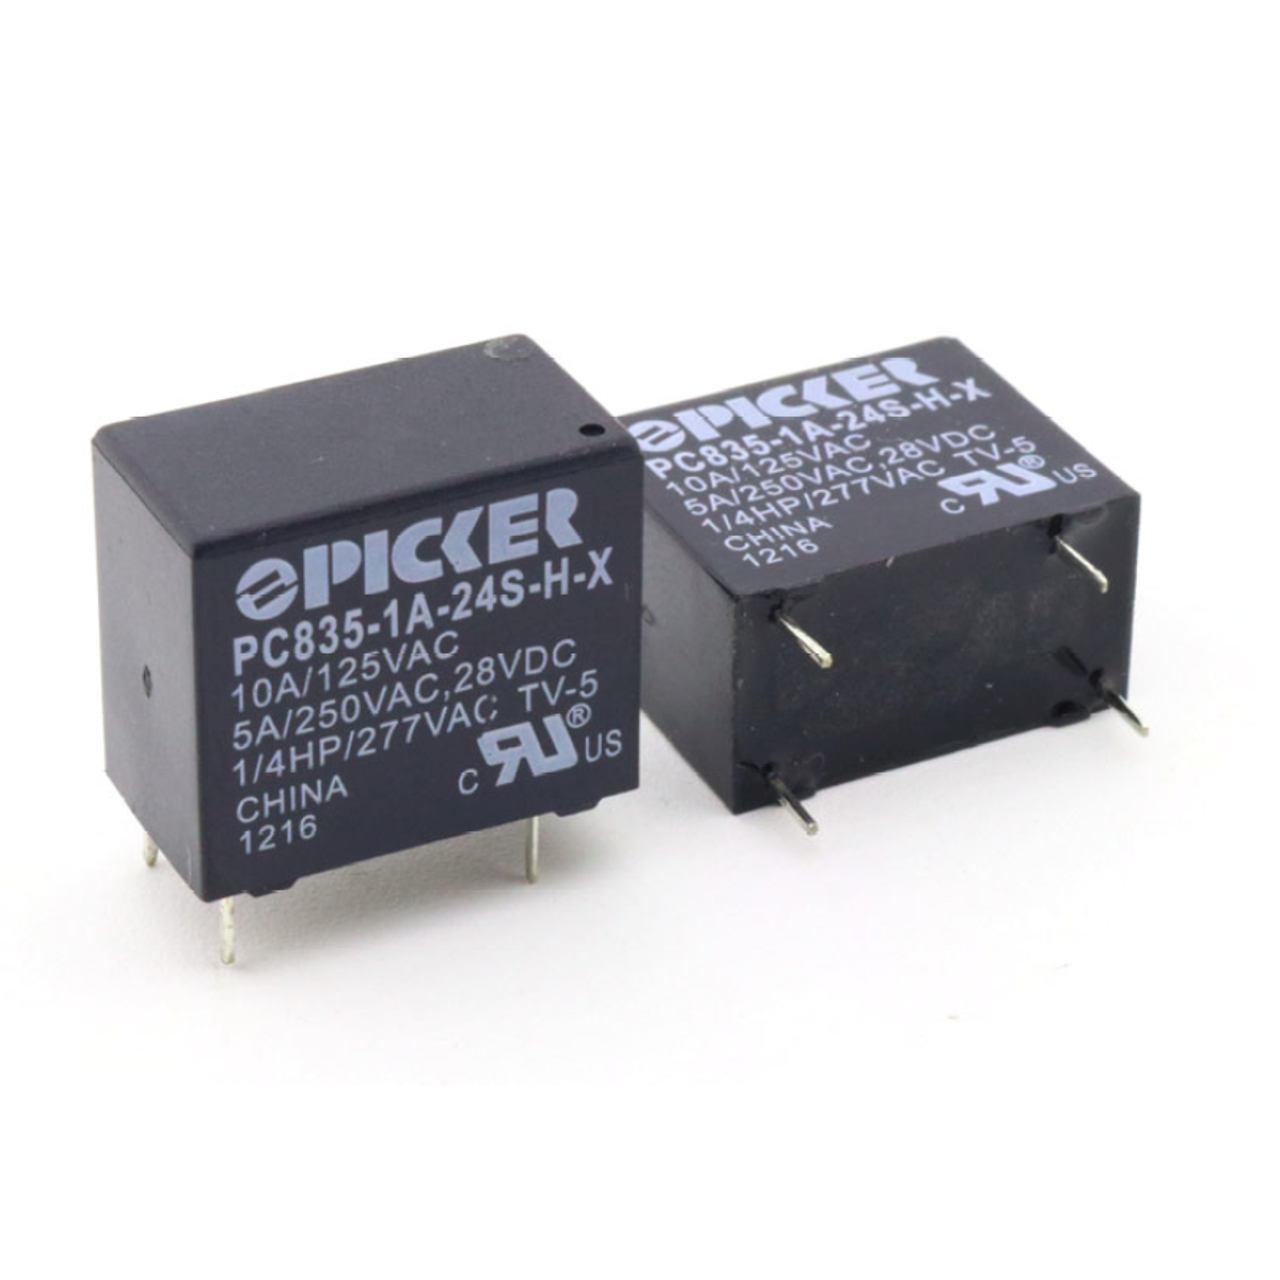 Picker PC835-1A-6S-H-X Power Relays